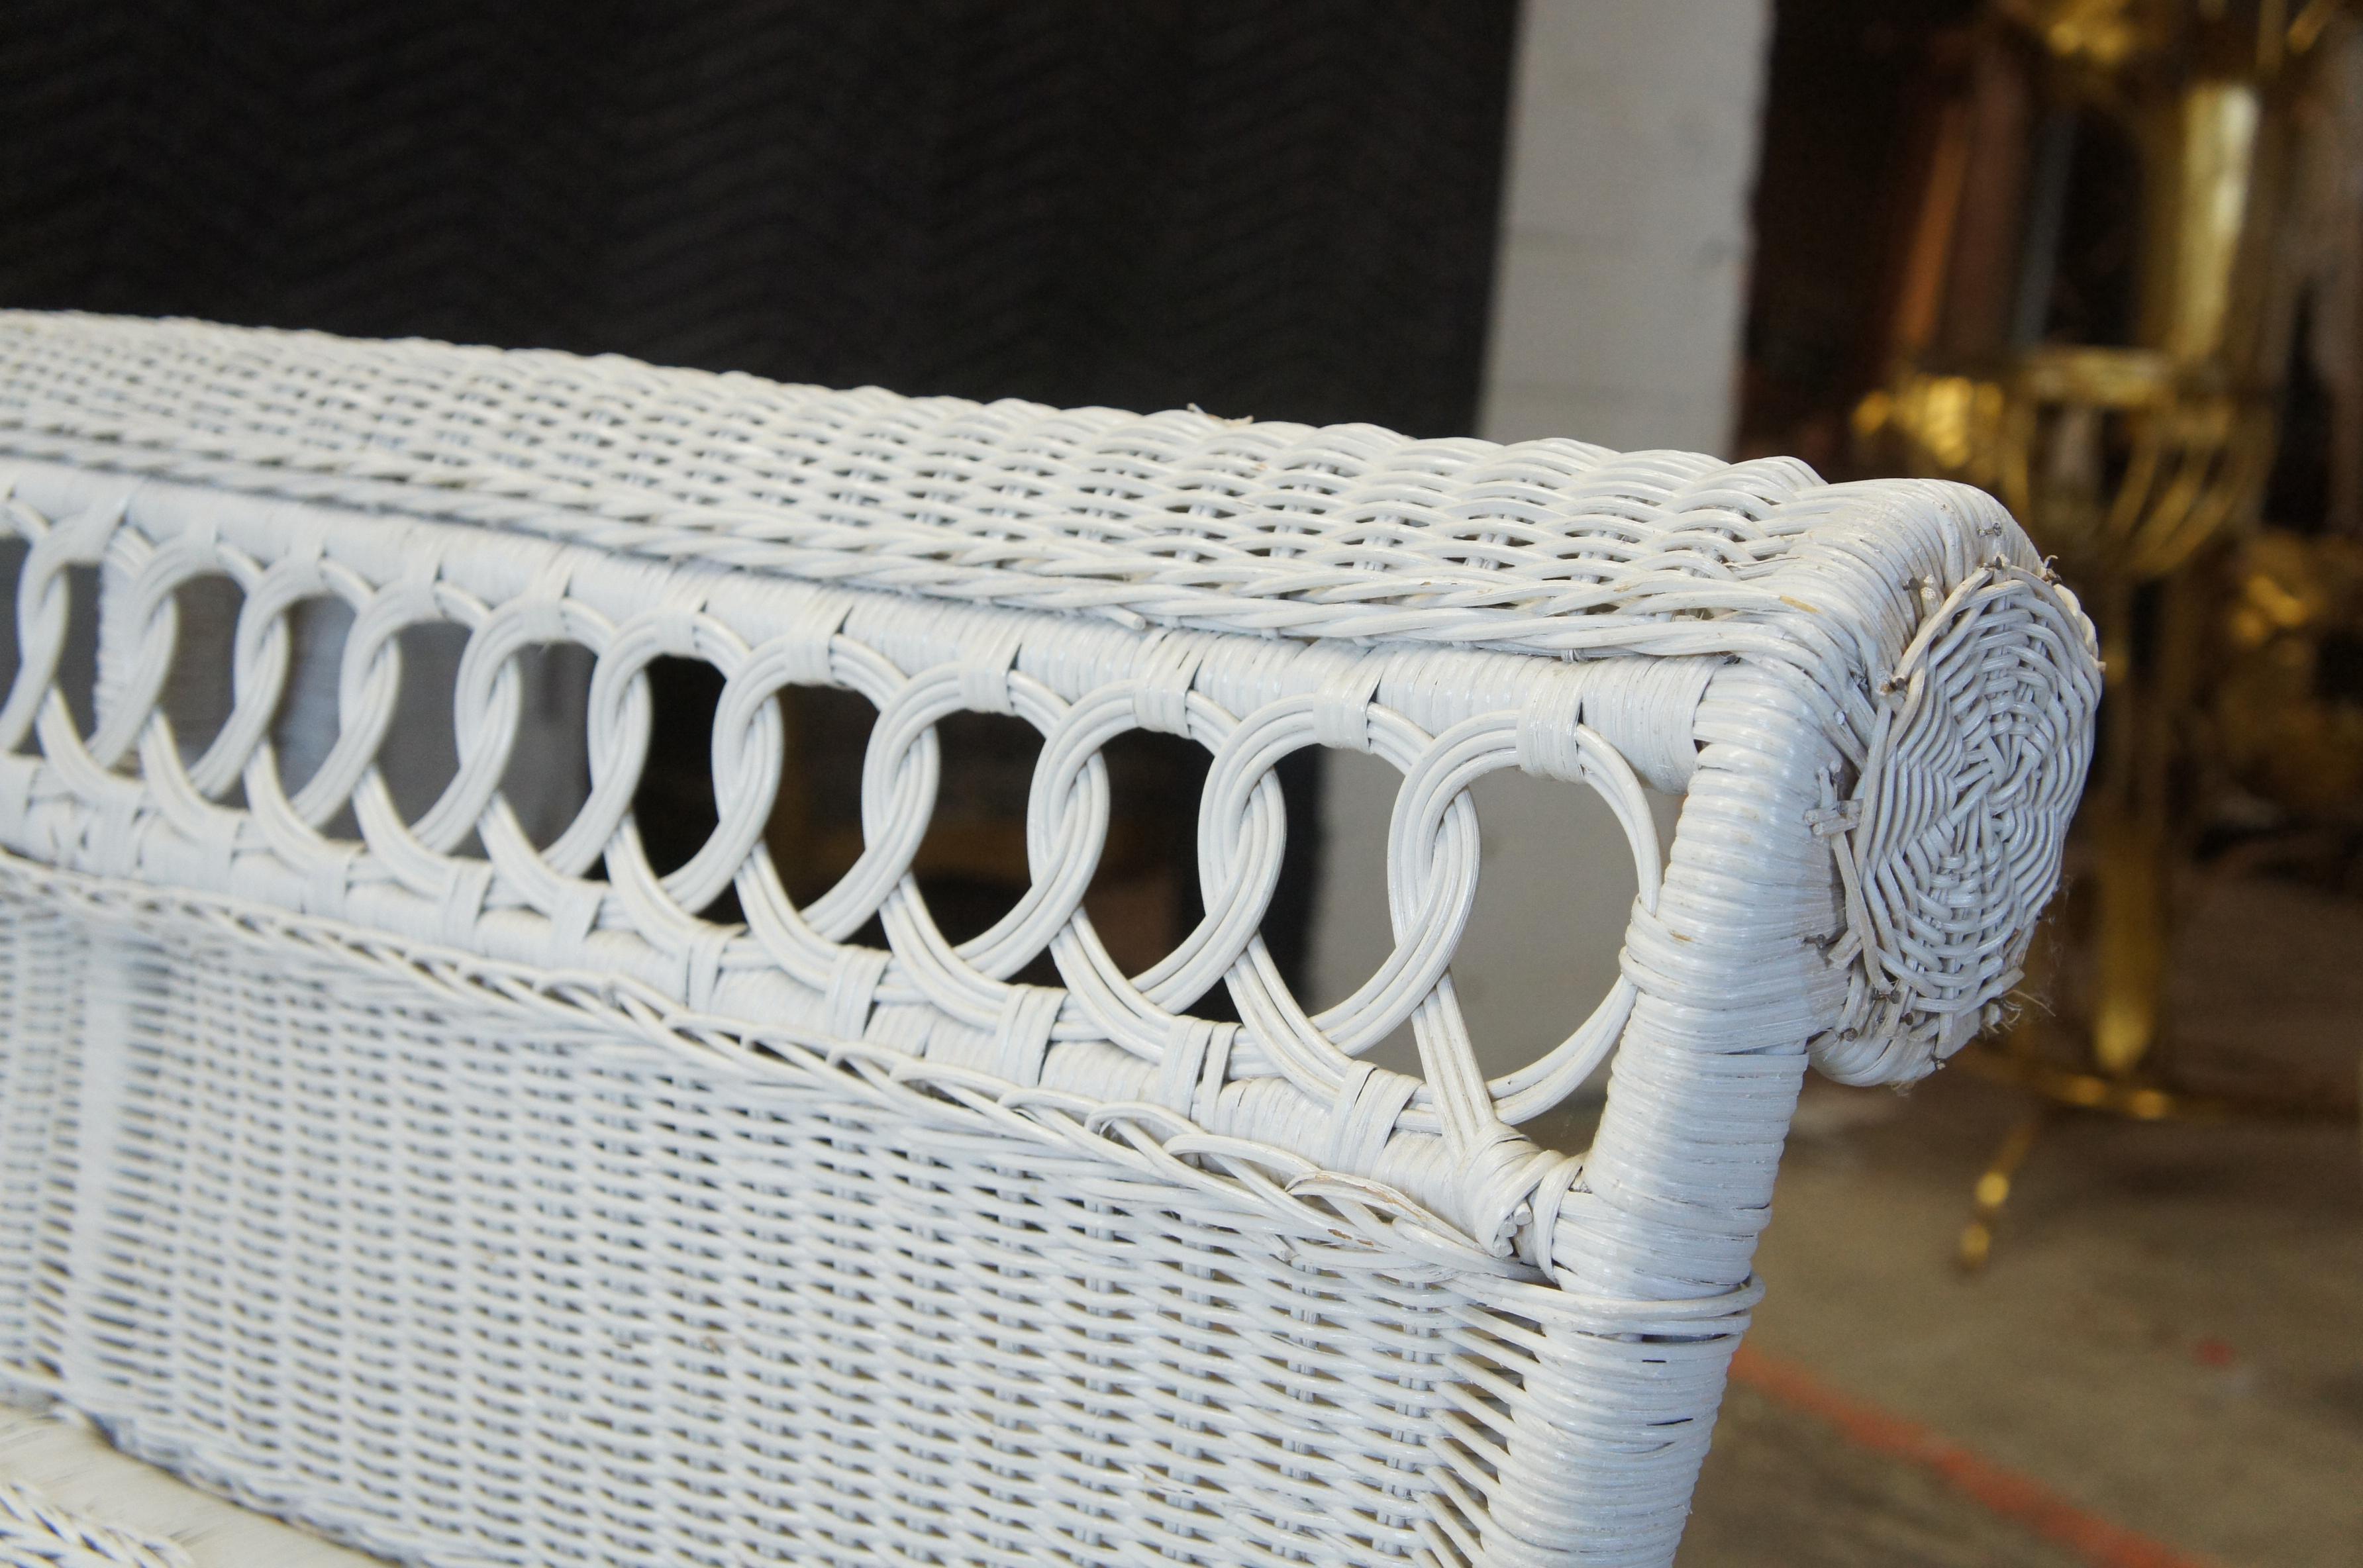 Upholstery Vintage White American Wicker Rattan Chaise Lounge Chair Rolled Arm Boho Chic